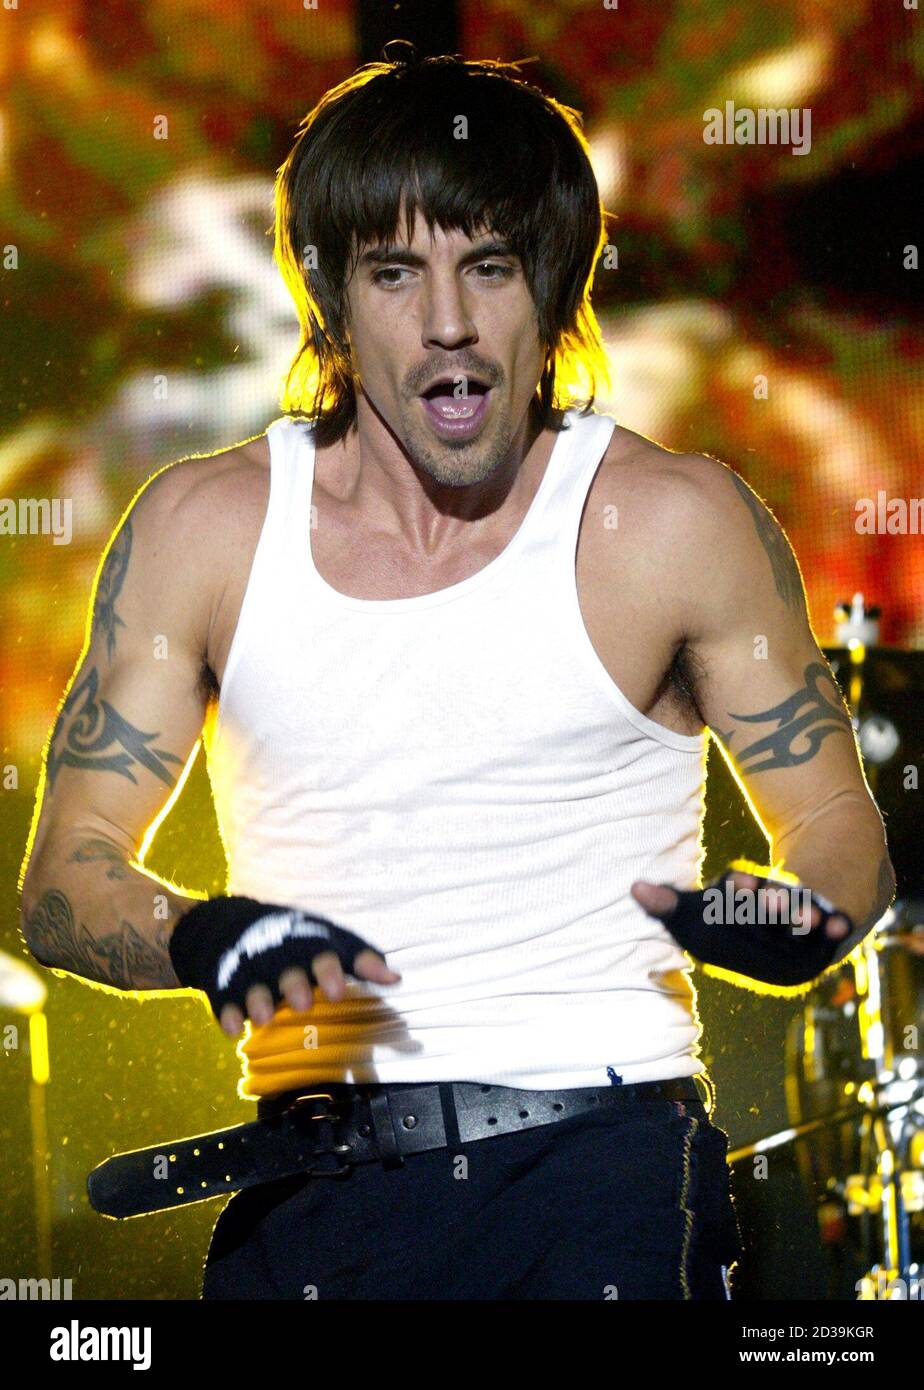 Red Hot Chili Peppers singer Anthony Kiedis performs during the first of two sold-out shows at The Joint inside Hard Rock Hotel & Casino in Las Vegas, Nevada, December 30, 2002. The rock band will embark on a European tour in January to promote the platinum-selling album 'By The Way.' The group also plans to reissue remastered versions of their first four albums on Jan. 28 with previously unreleased bonus tracks. BEST QUALITY AVAILABLE REUTERS/Ethan Miller  EM/SV Stock Photo